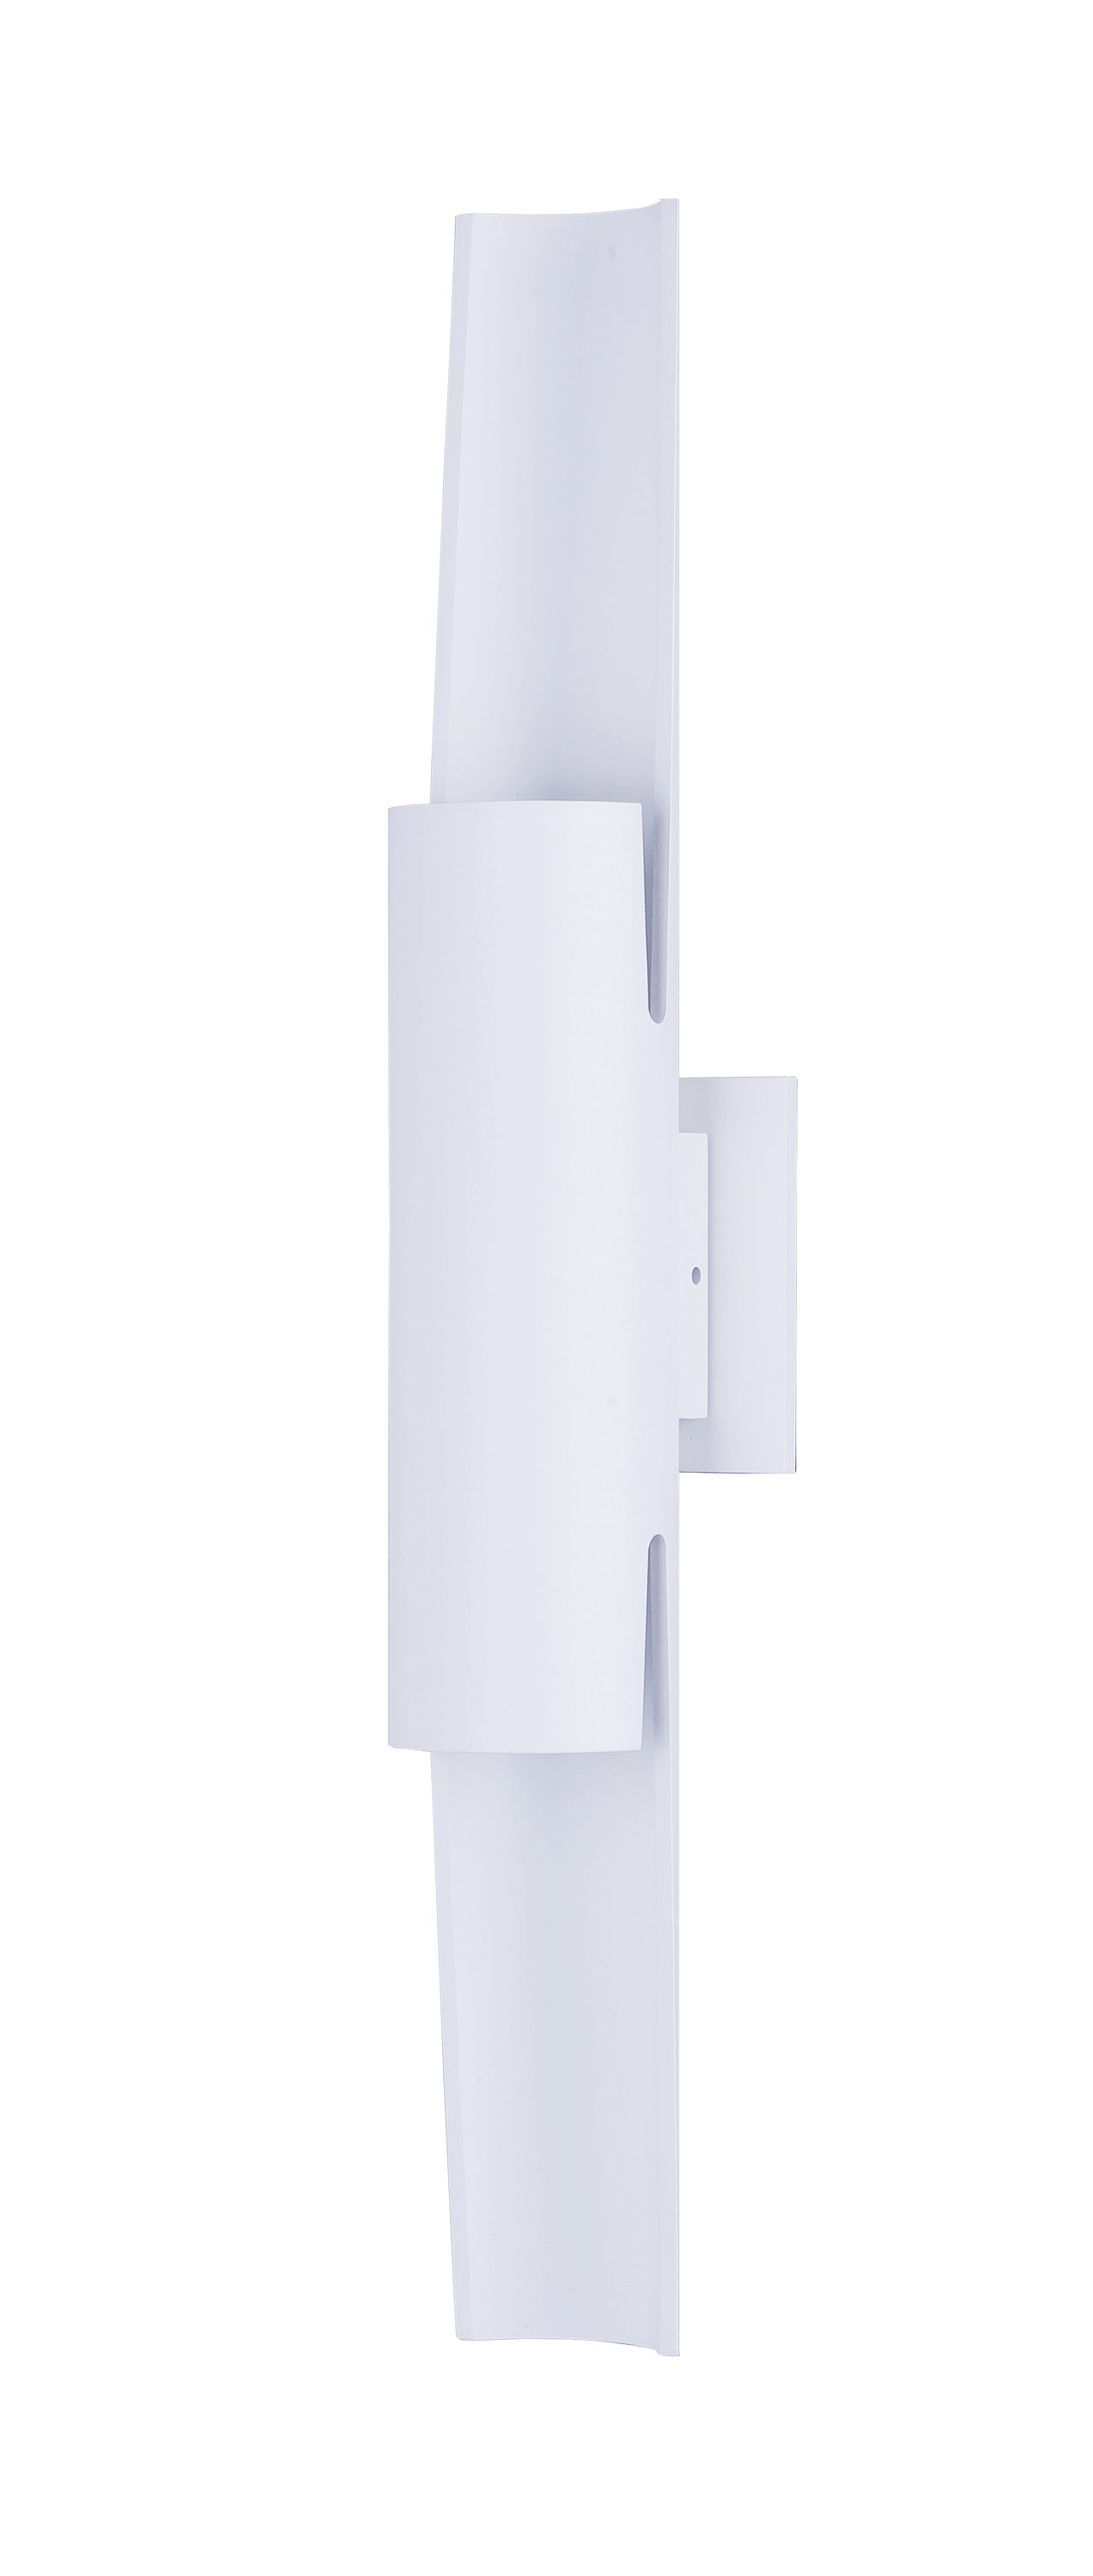 Alumilux Runway-Outdoor Wall Mount Outdoor l Wall ET2 x4.25x23.5 White 